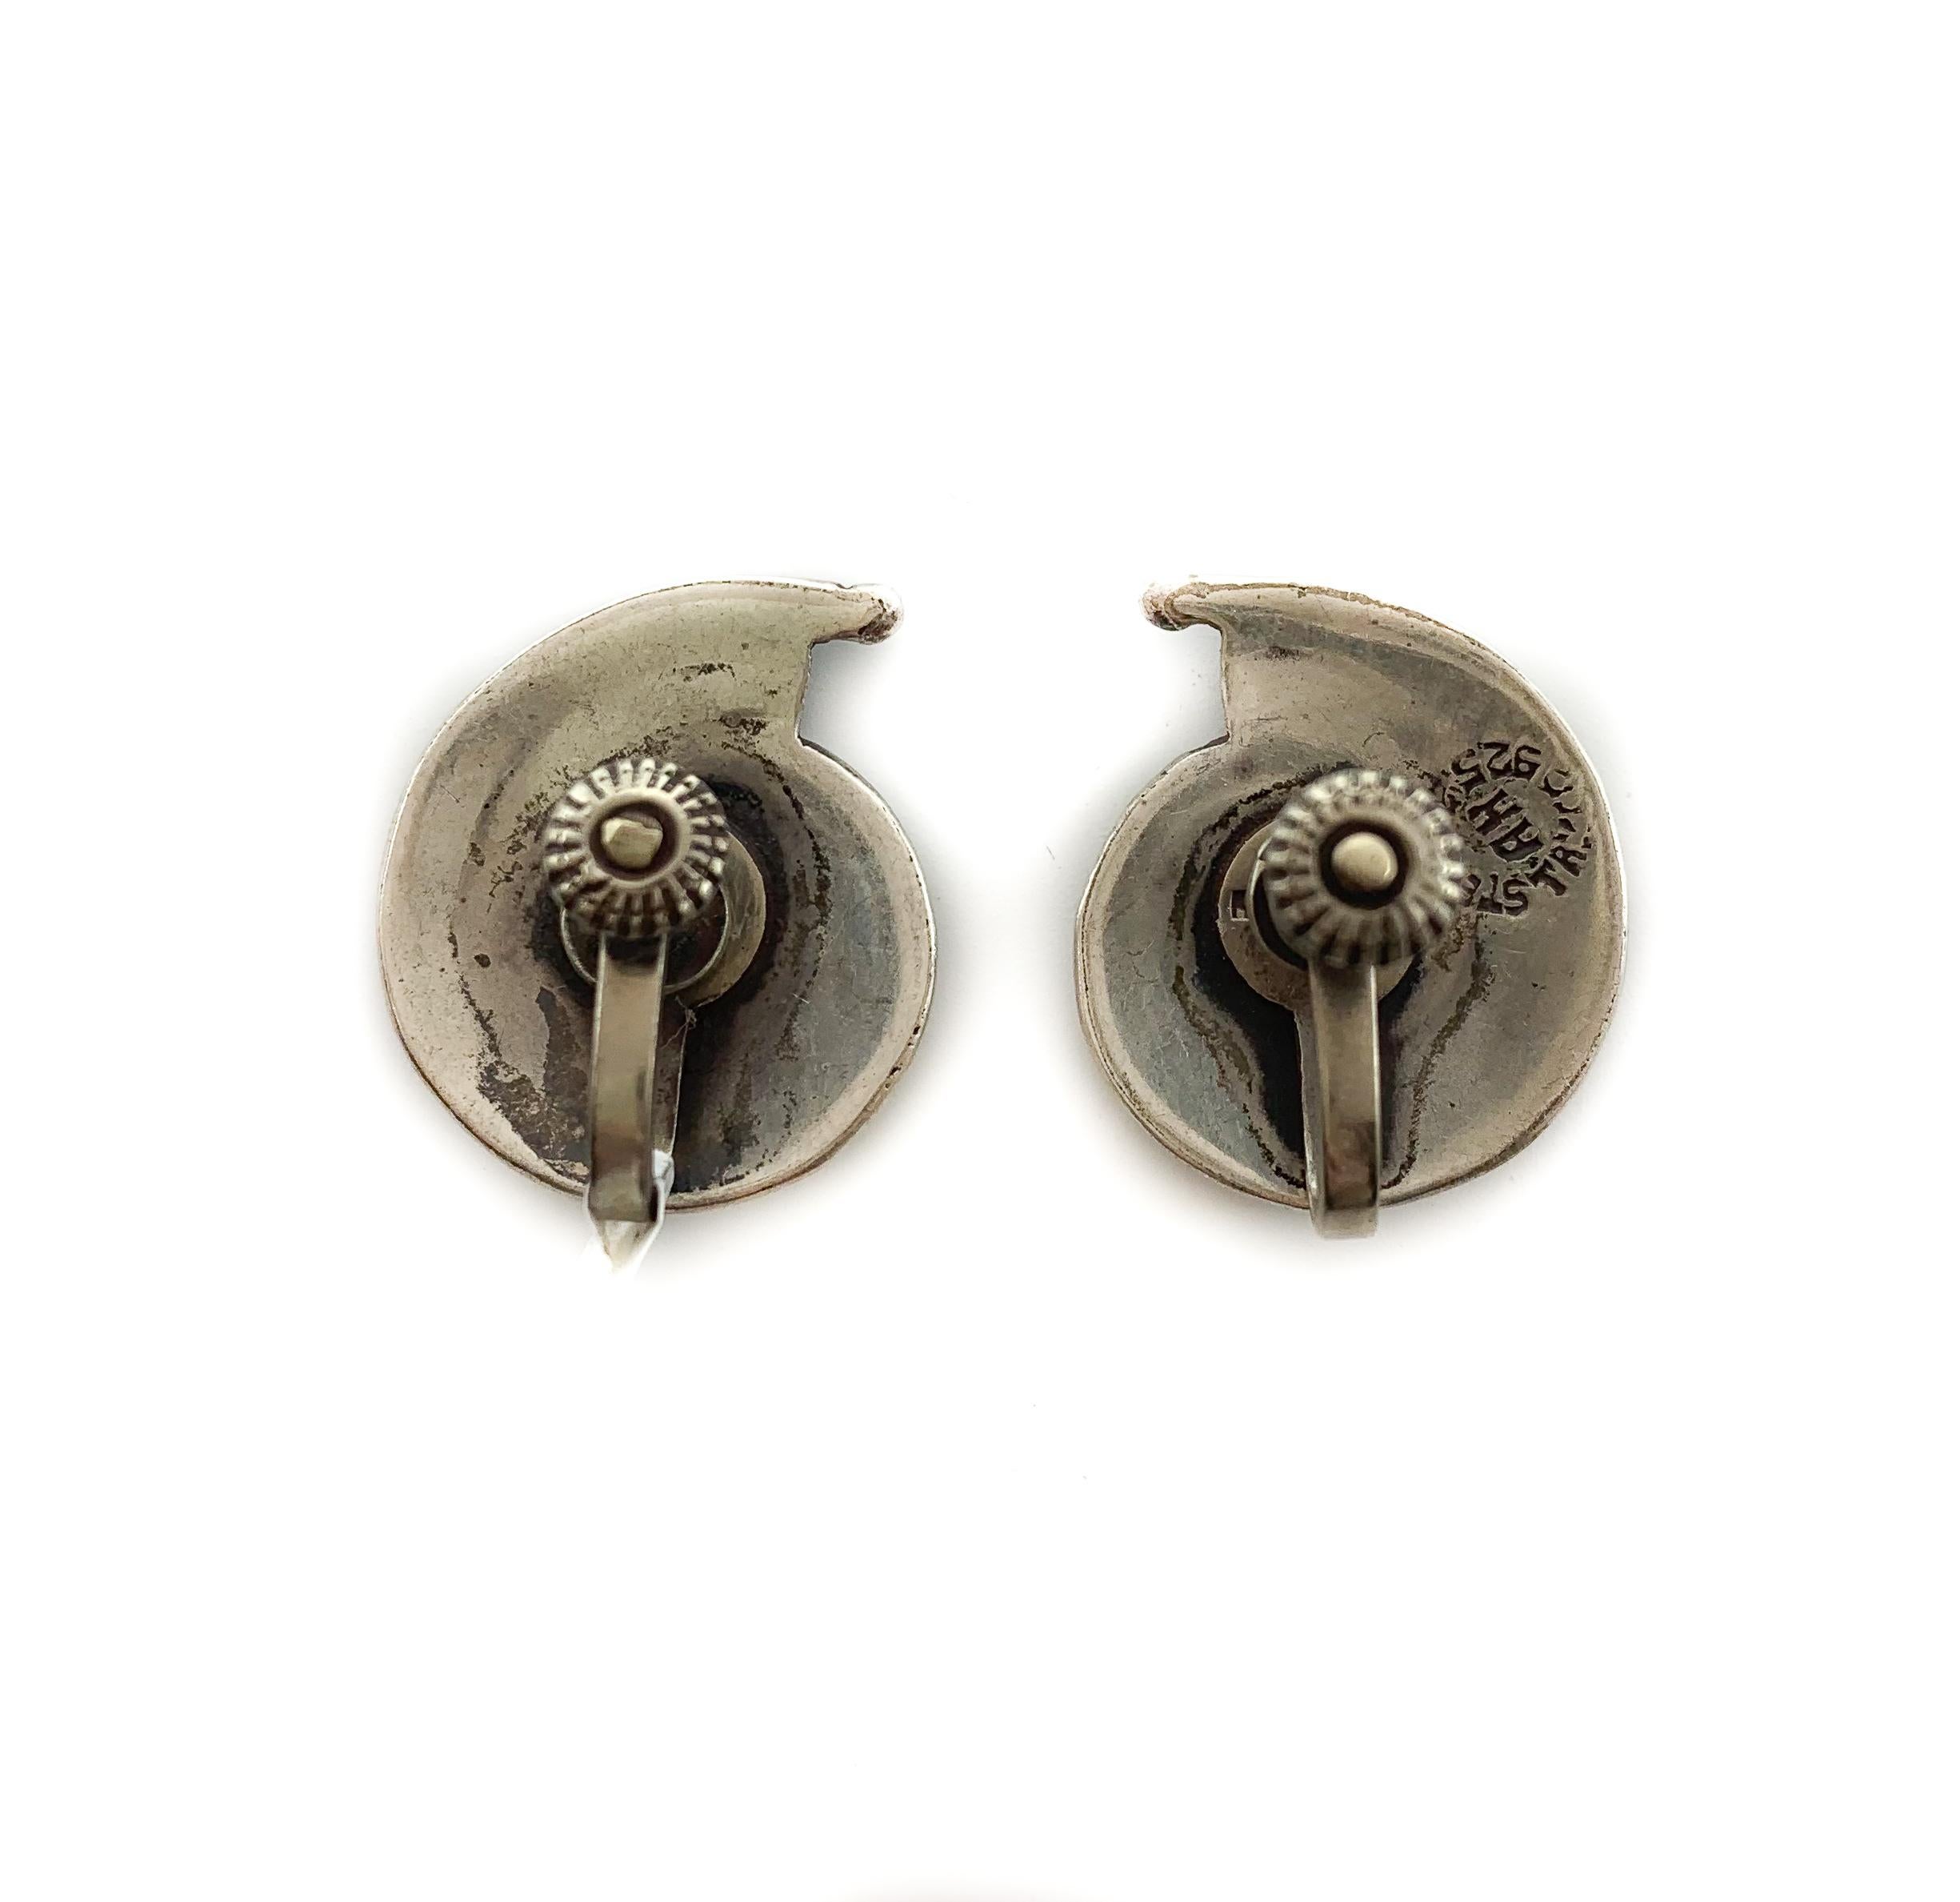 Vintage Silver Swirl Design Earrings In Excellent Condition For Sale In Carlsbad, CA